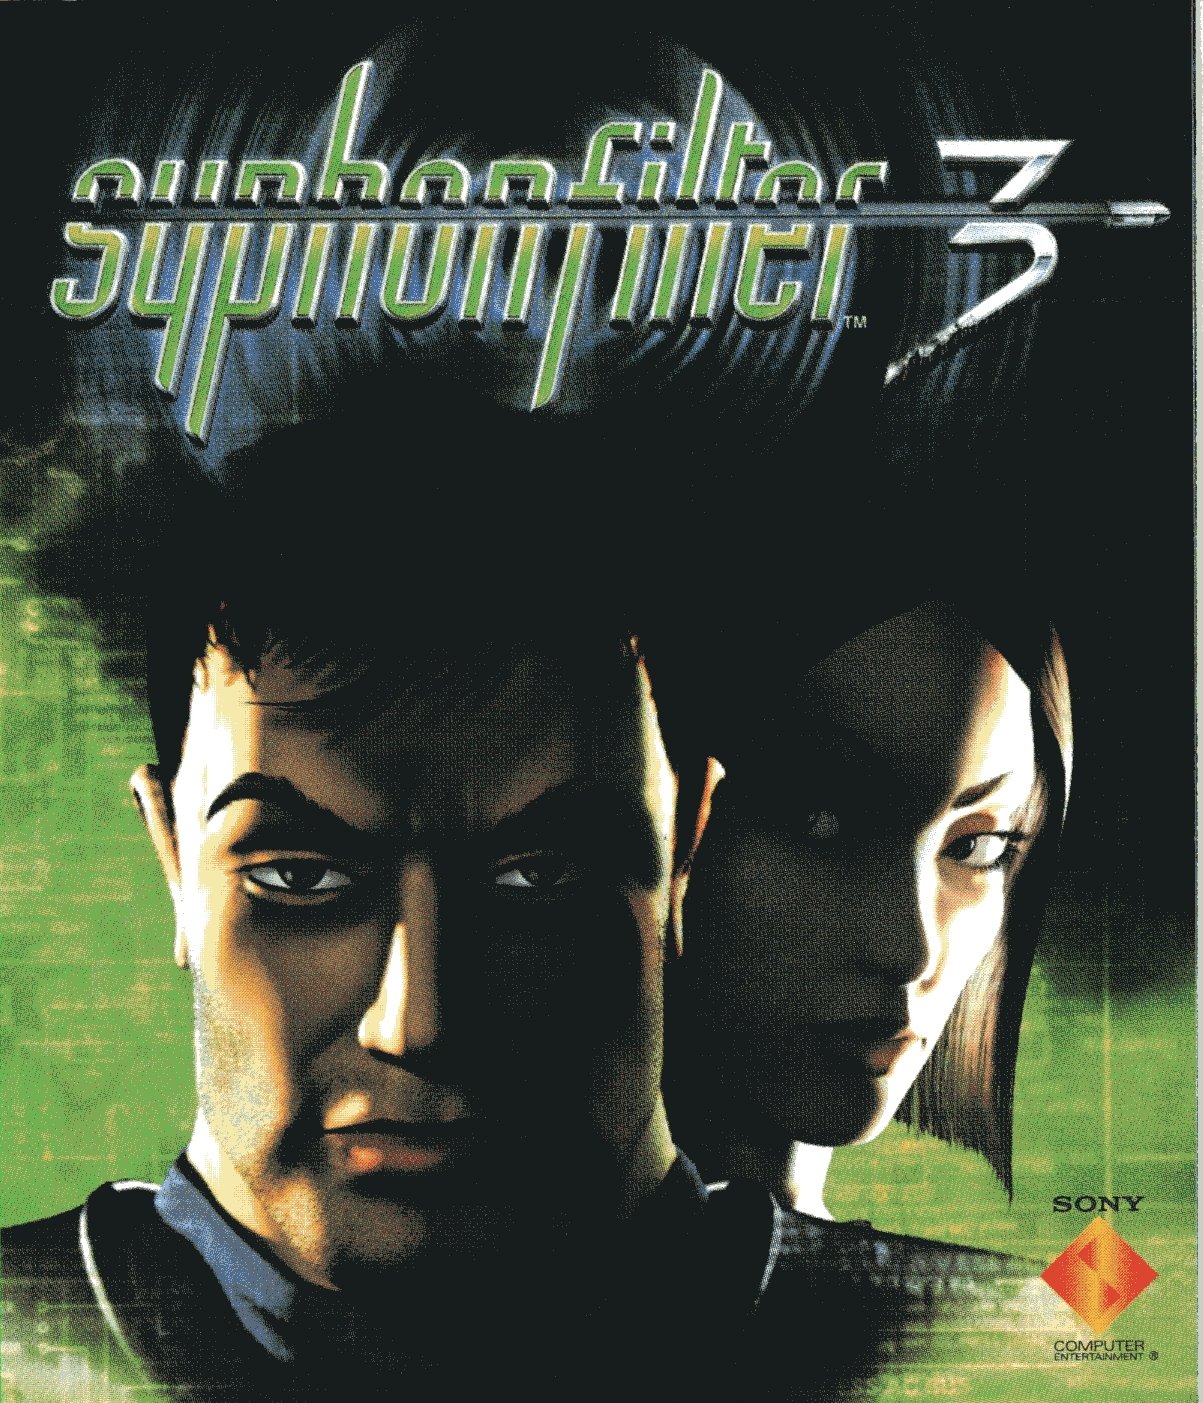 Image of Syphon Filter 3